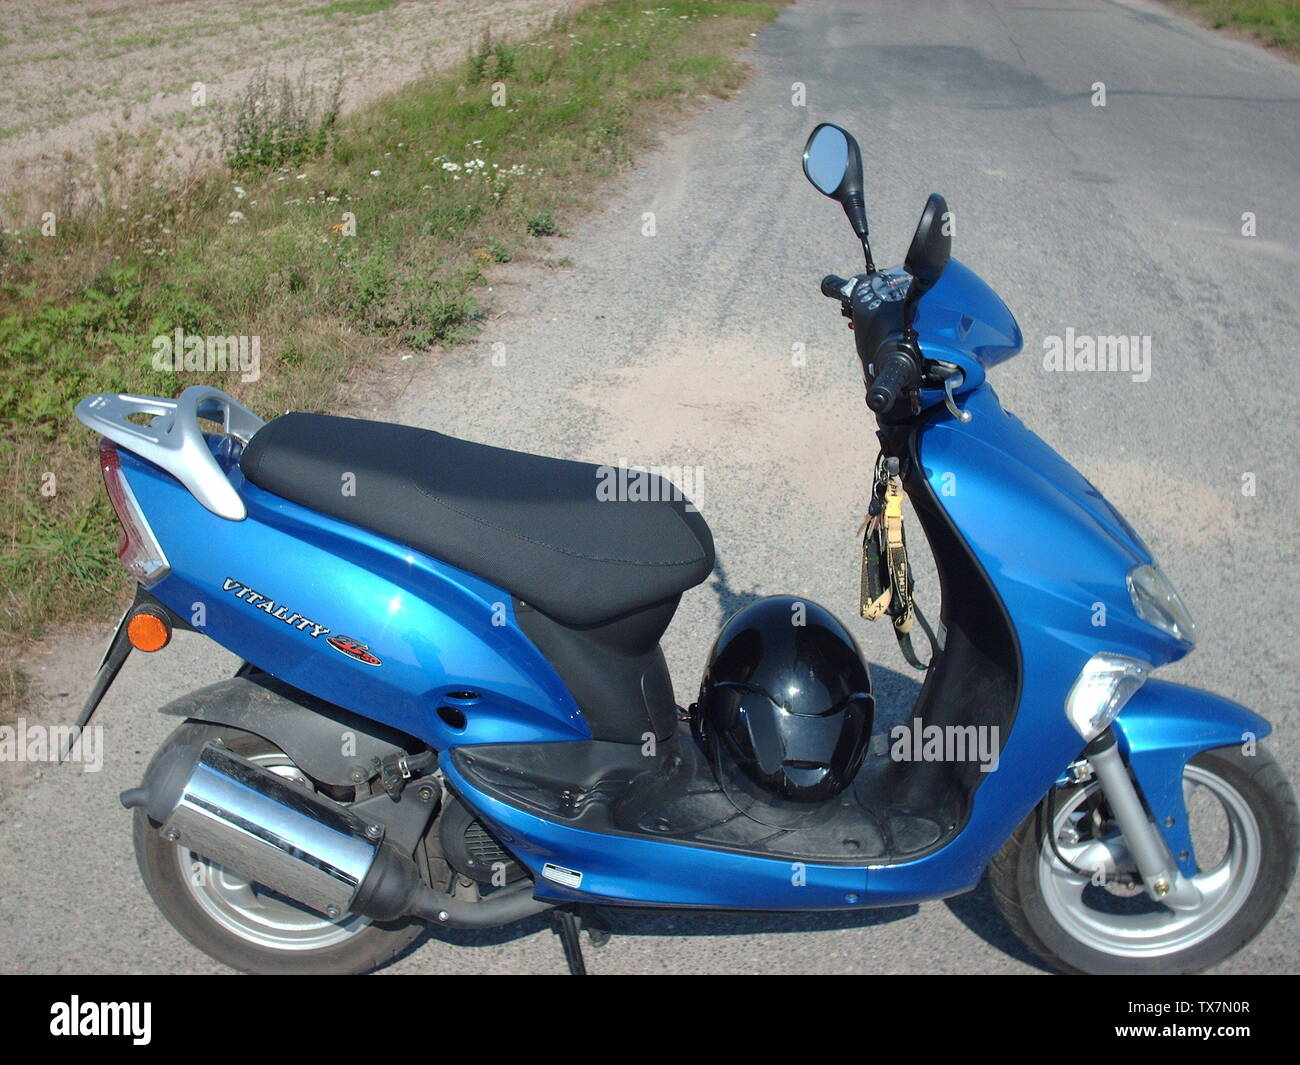 Kymco High Resolution Stock Photography and Images - Alamy